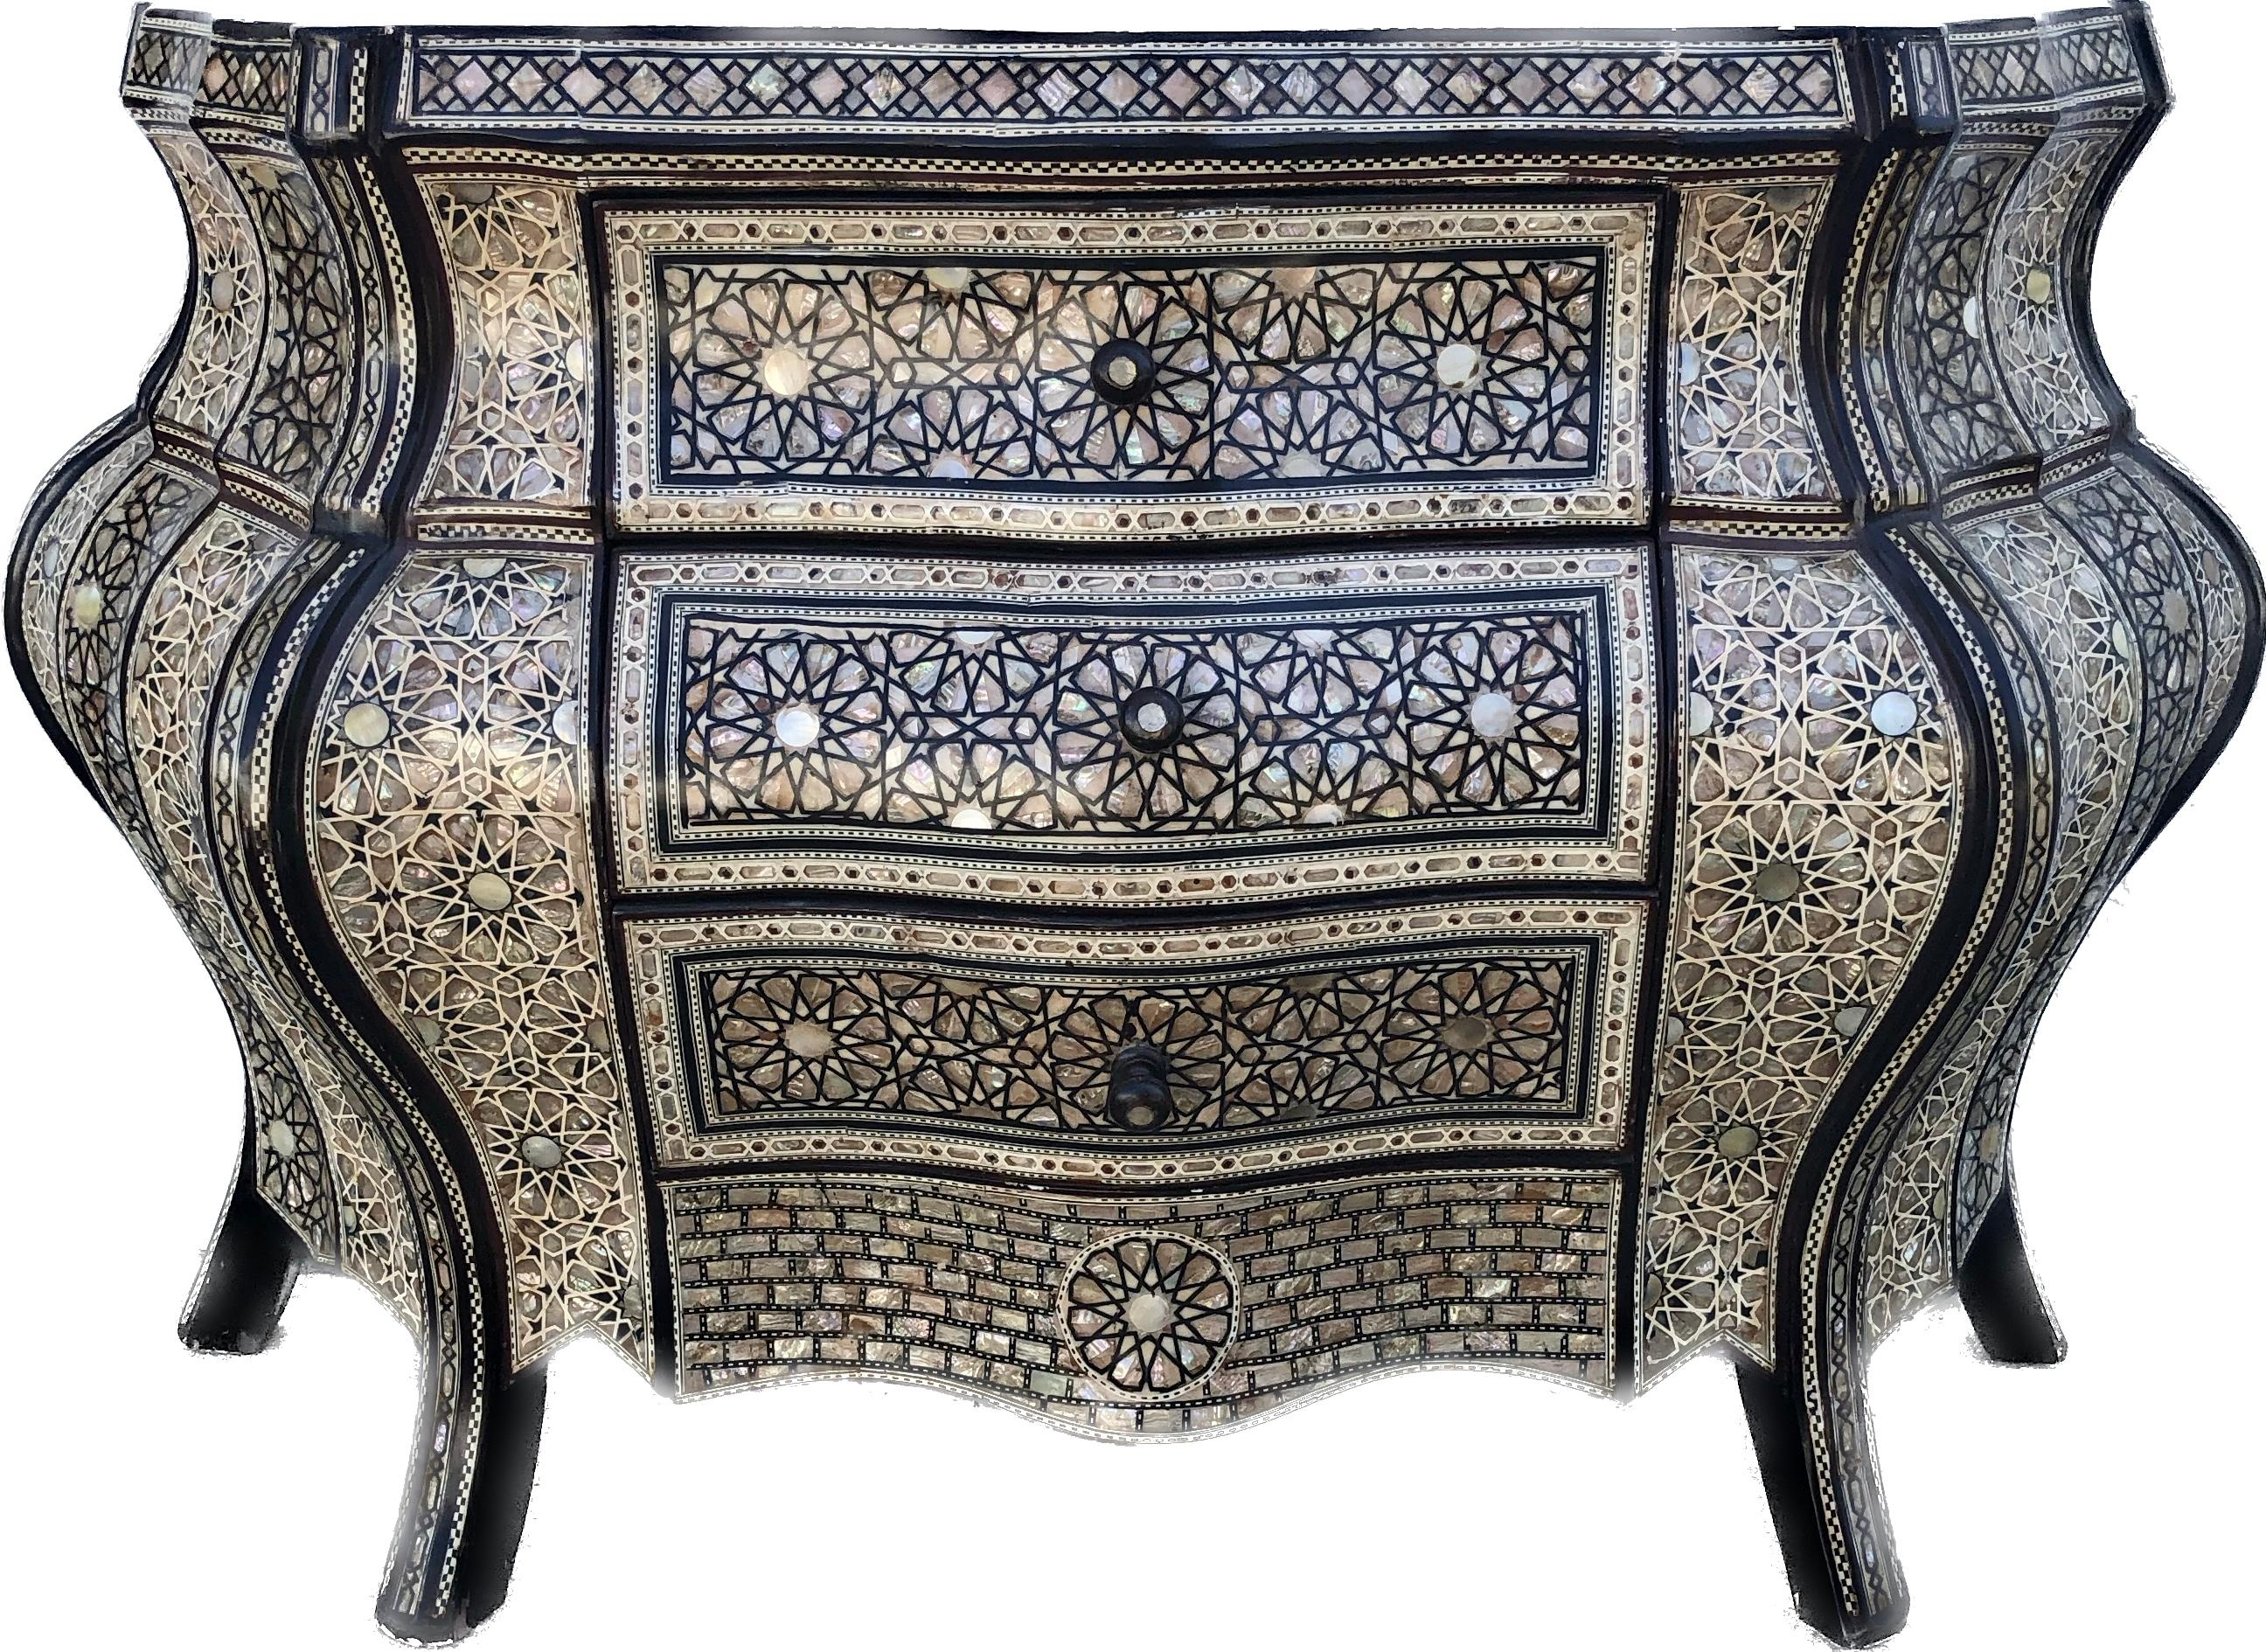 Camel bone and mother of pearl inlaid three drawer commode with ball turned pulls and geometric detail. The double bombe serpentine chest extensively inlaid in a geometric pattern throughout. A rare find.